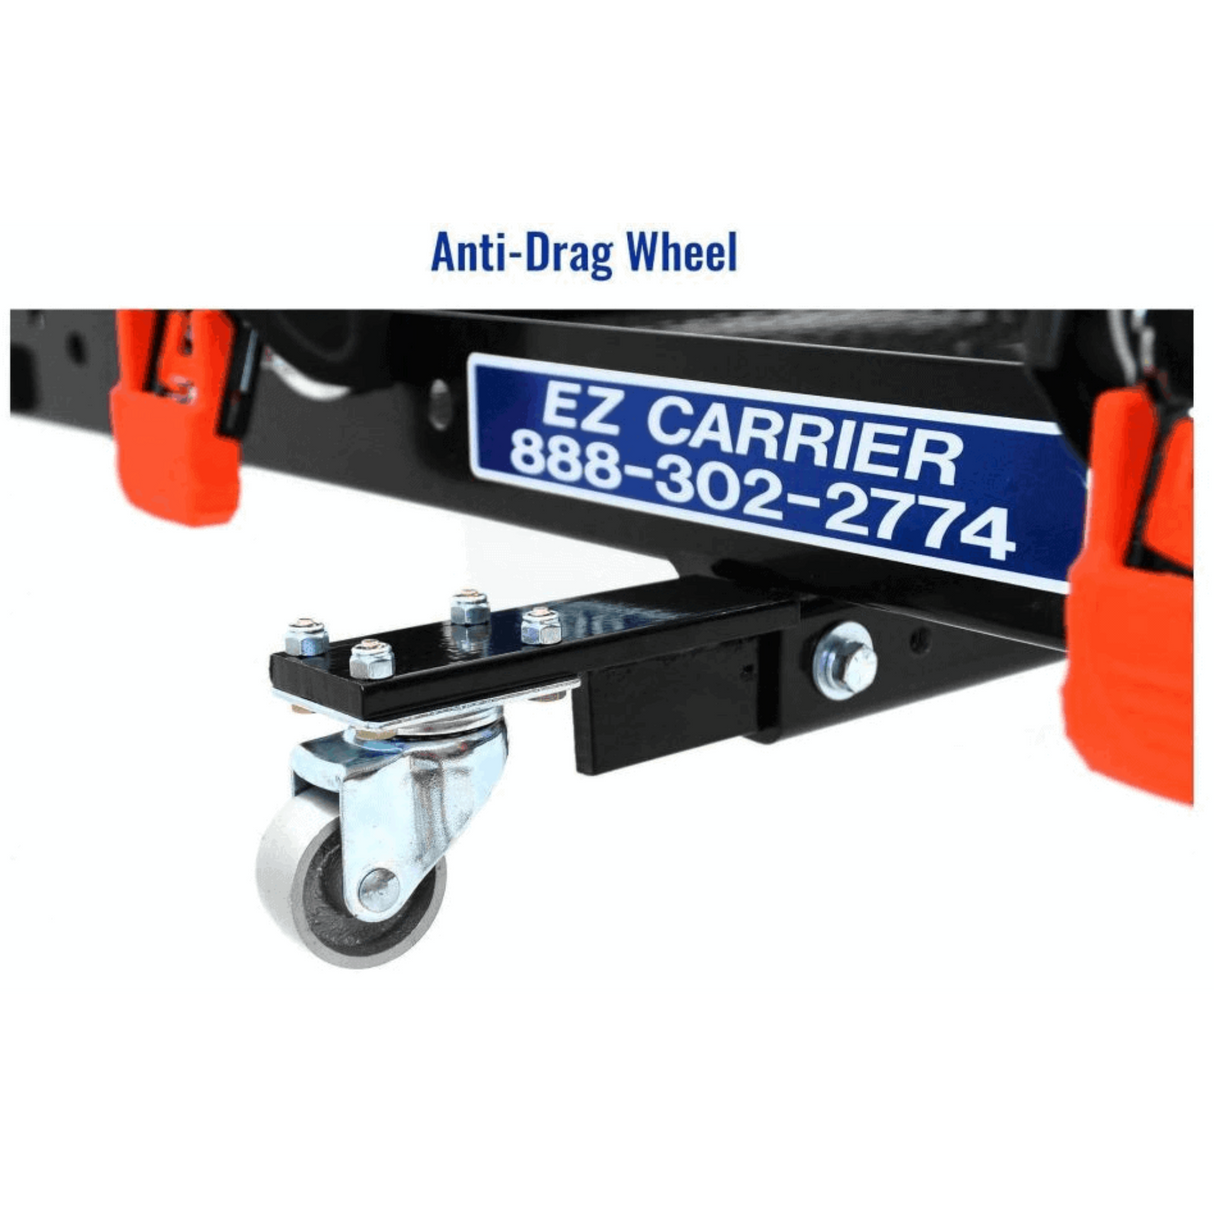 Anti-drag Wheel for EZC-2 and EZC-3 Wheelchair Carriers by EZ-Carrier